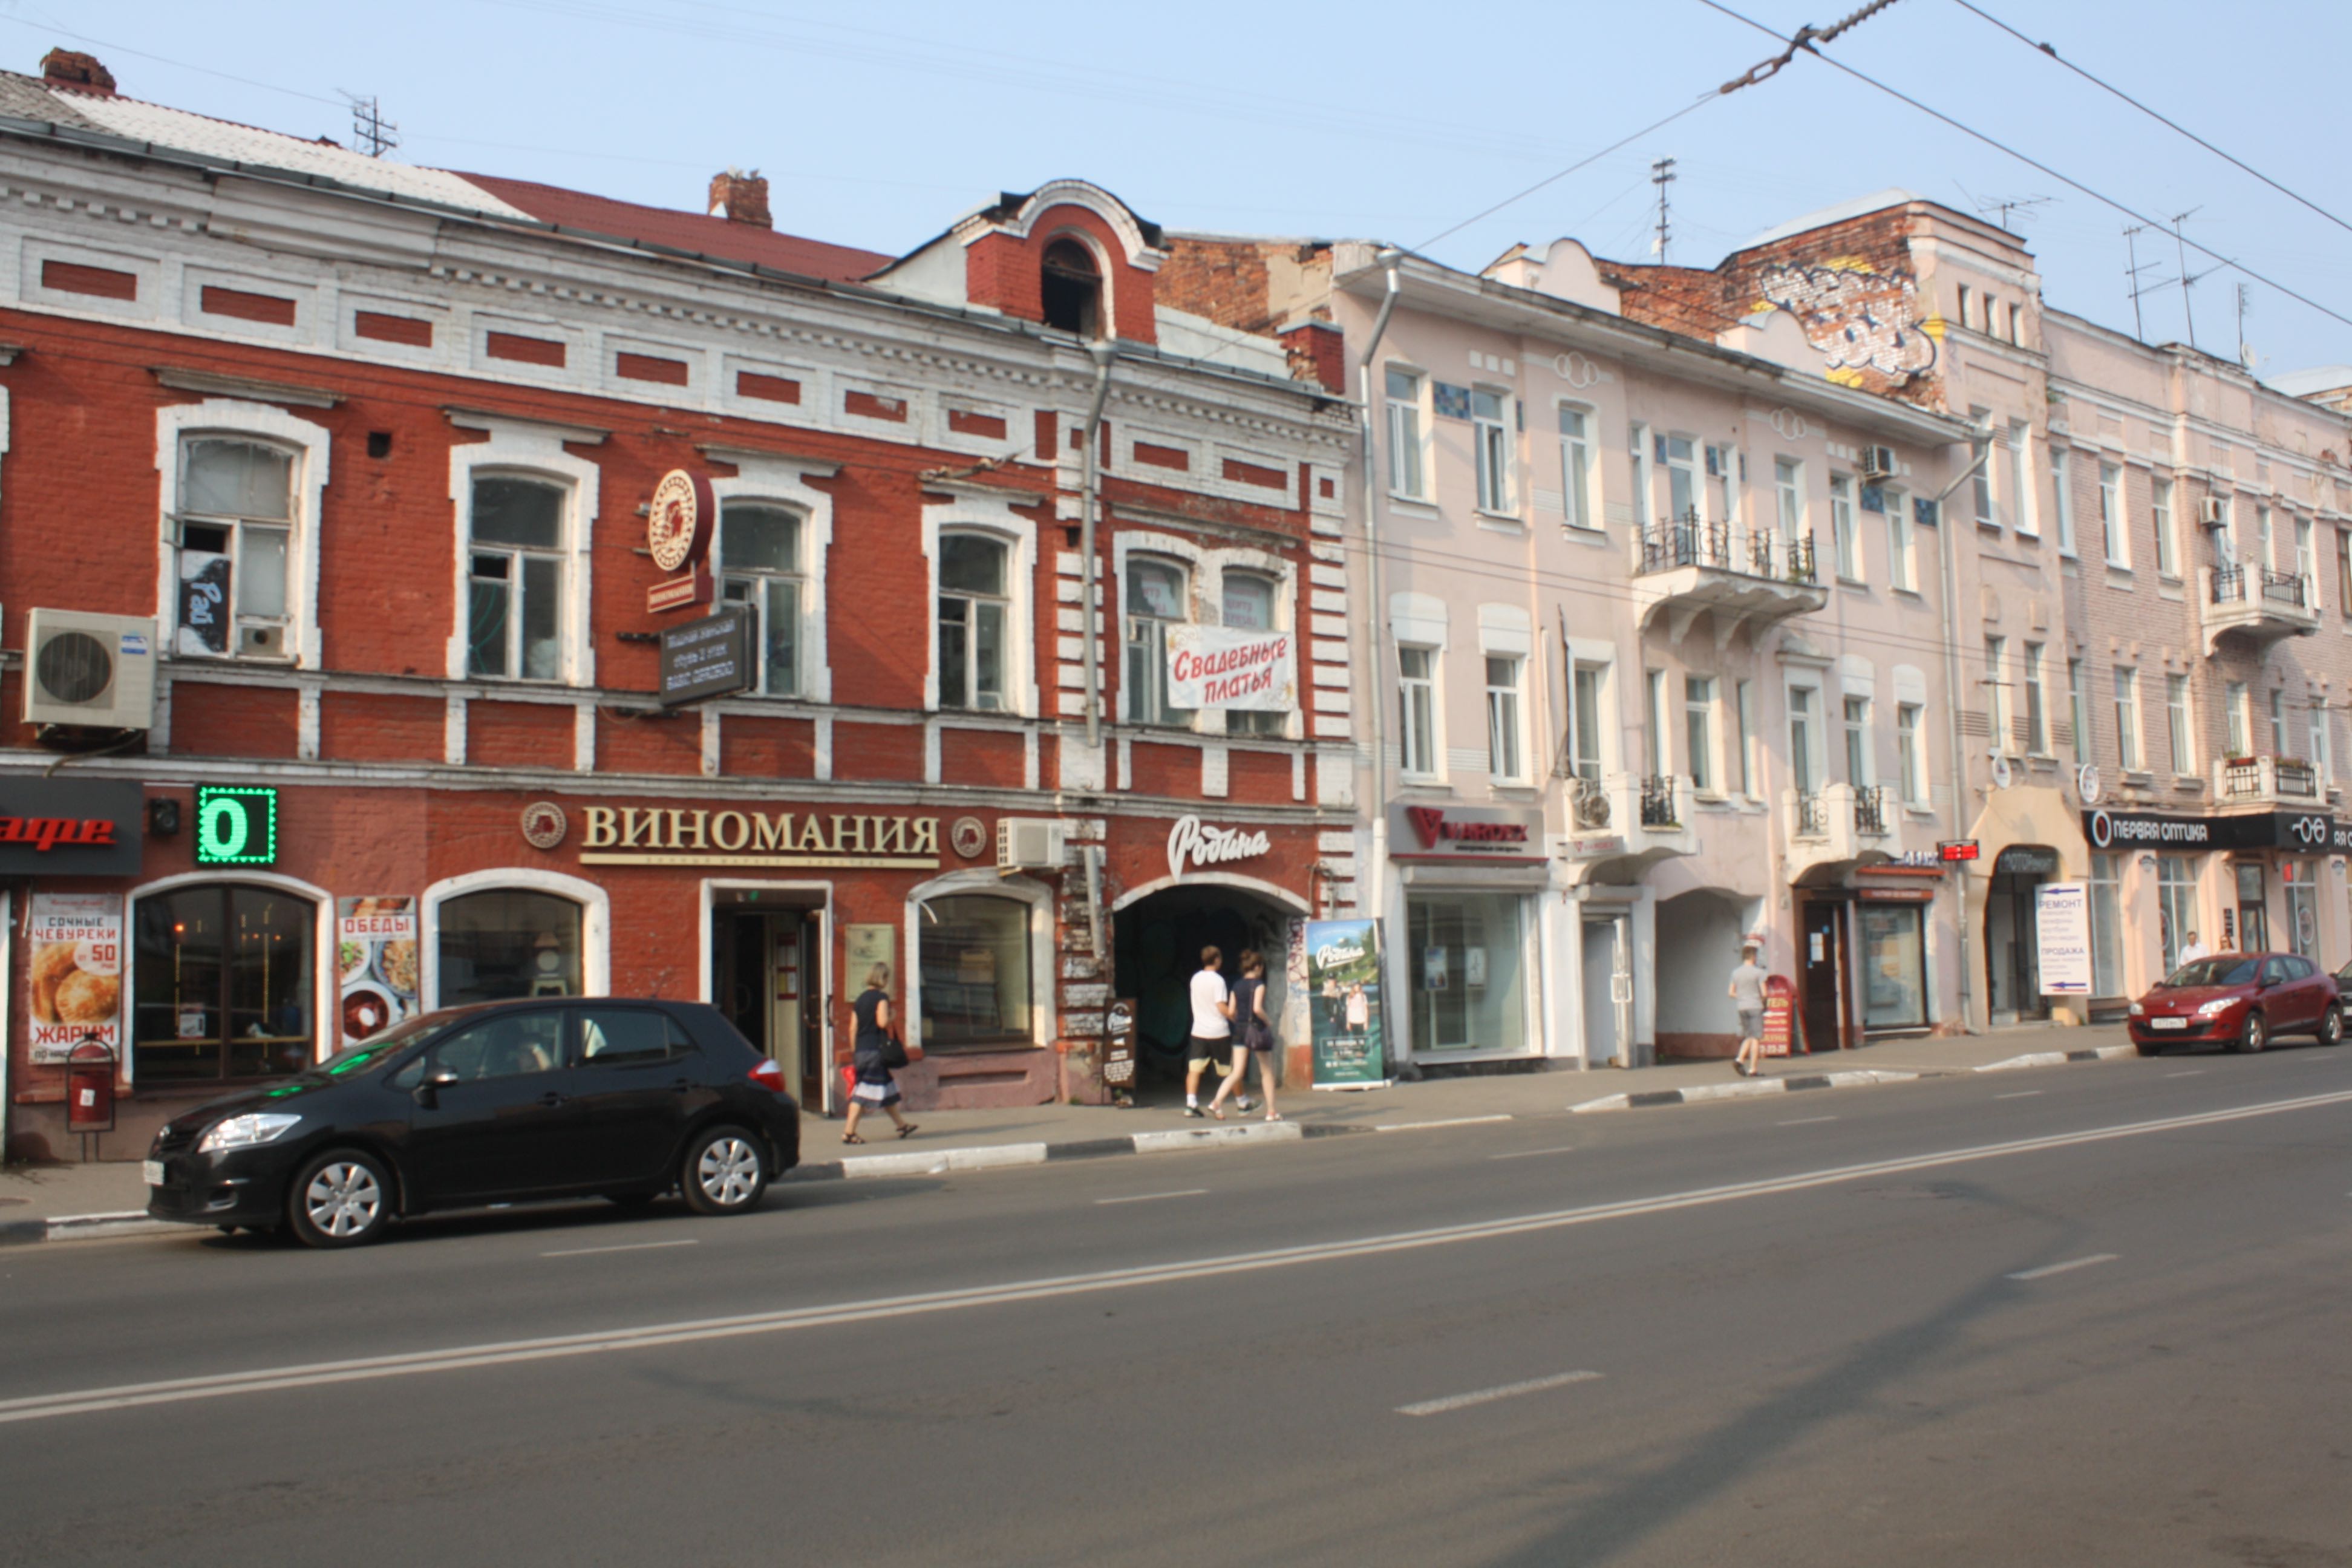 The city also has neighborhoods with late 19th century buildings.